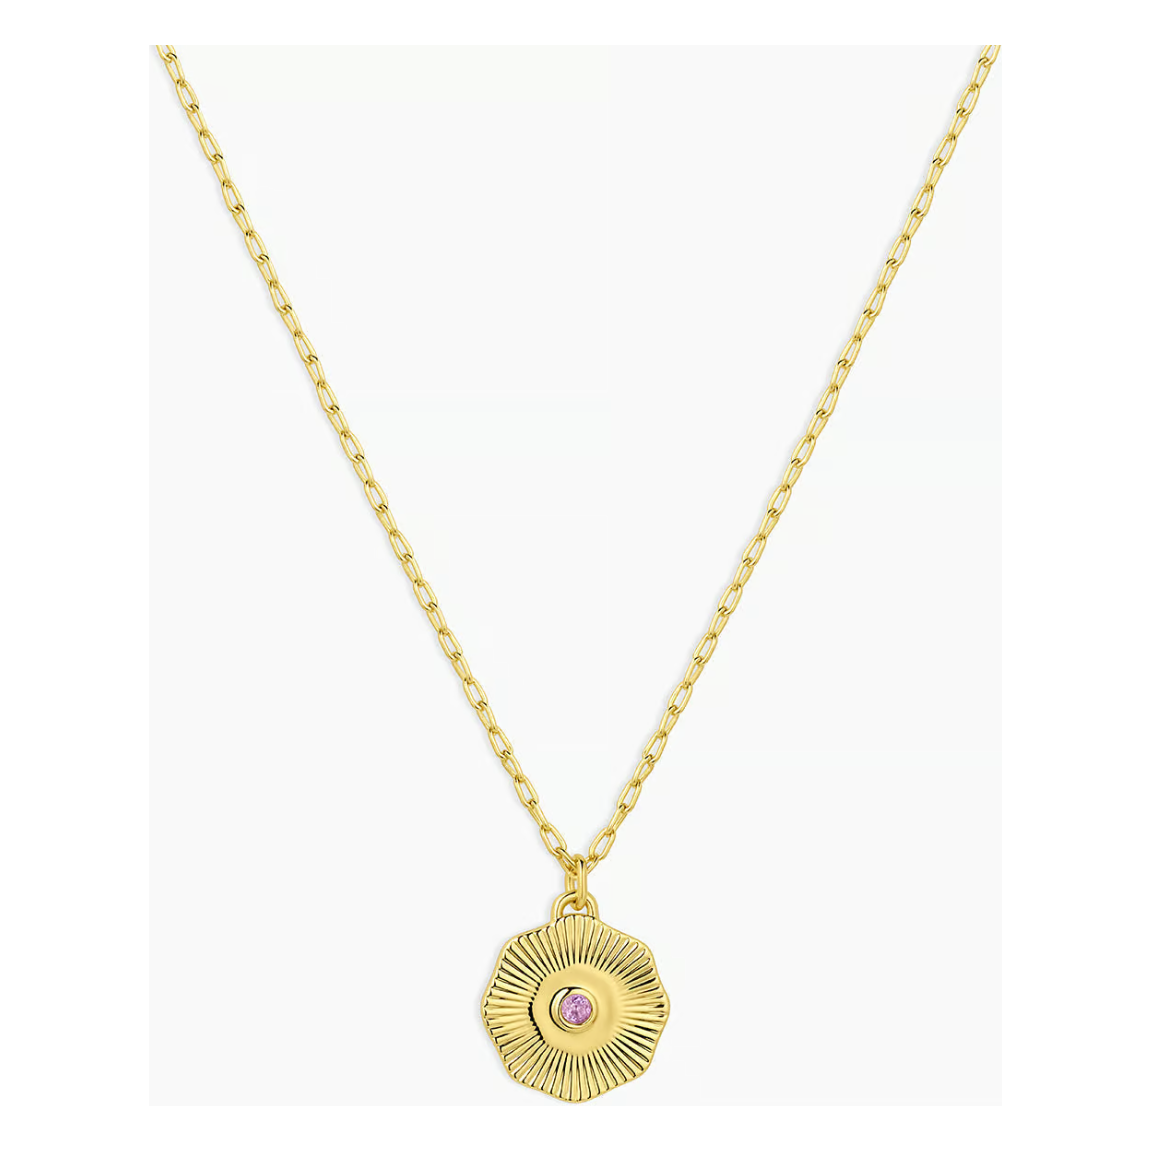 Birthstone Coin Necklace - February